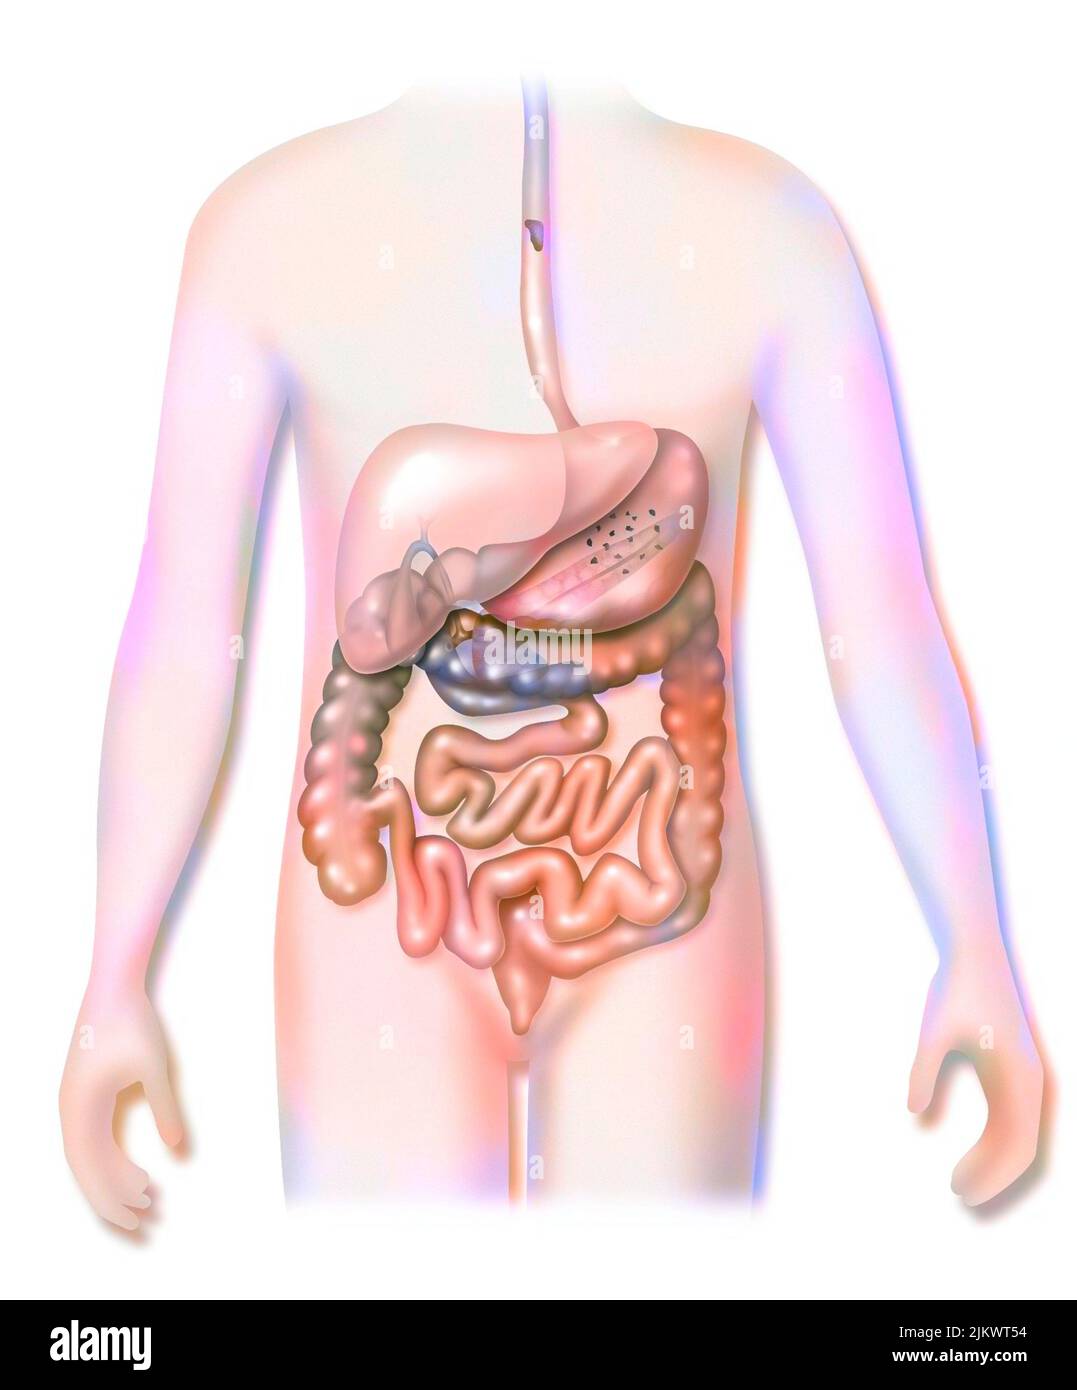 Digestive system with the gallbladder at the back of the liver. Stock Photo